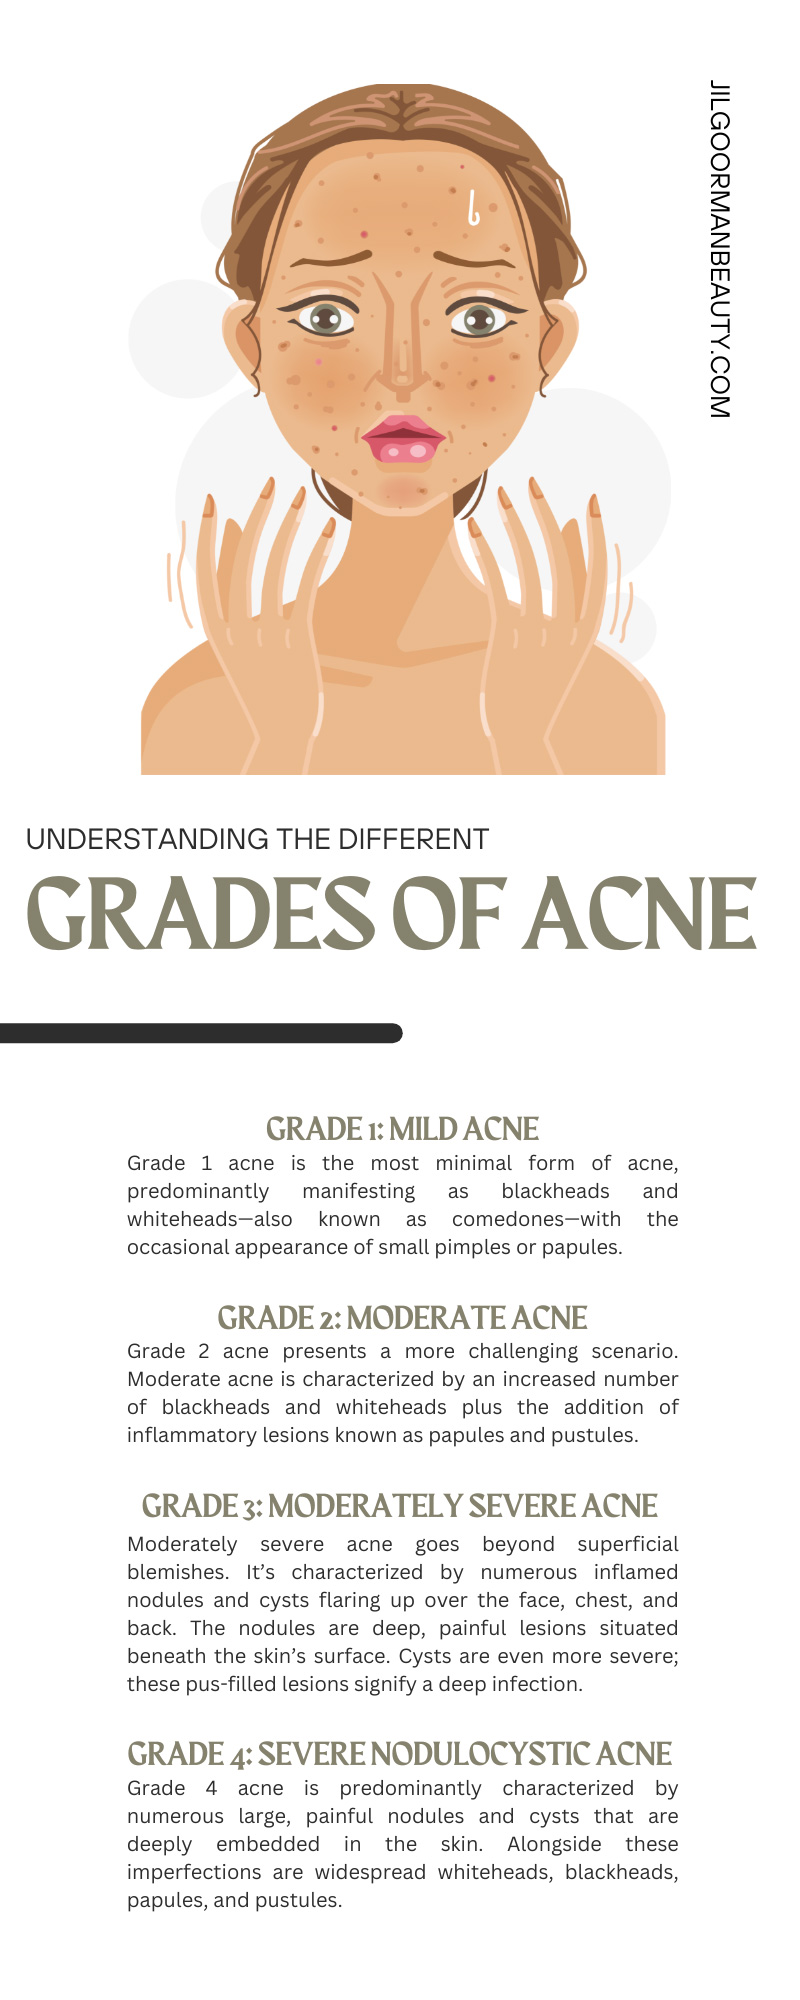 Understanding the Different Grades of Acne